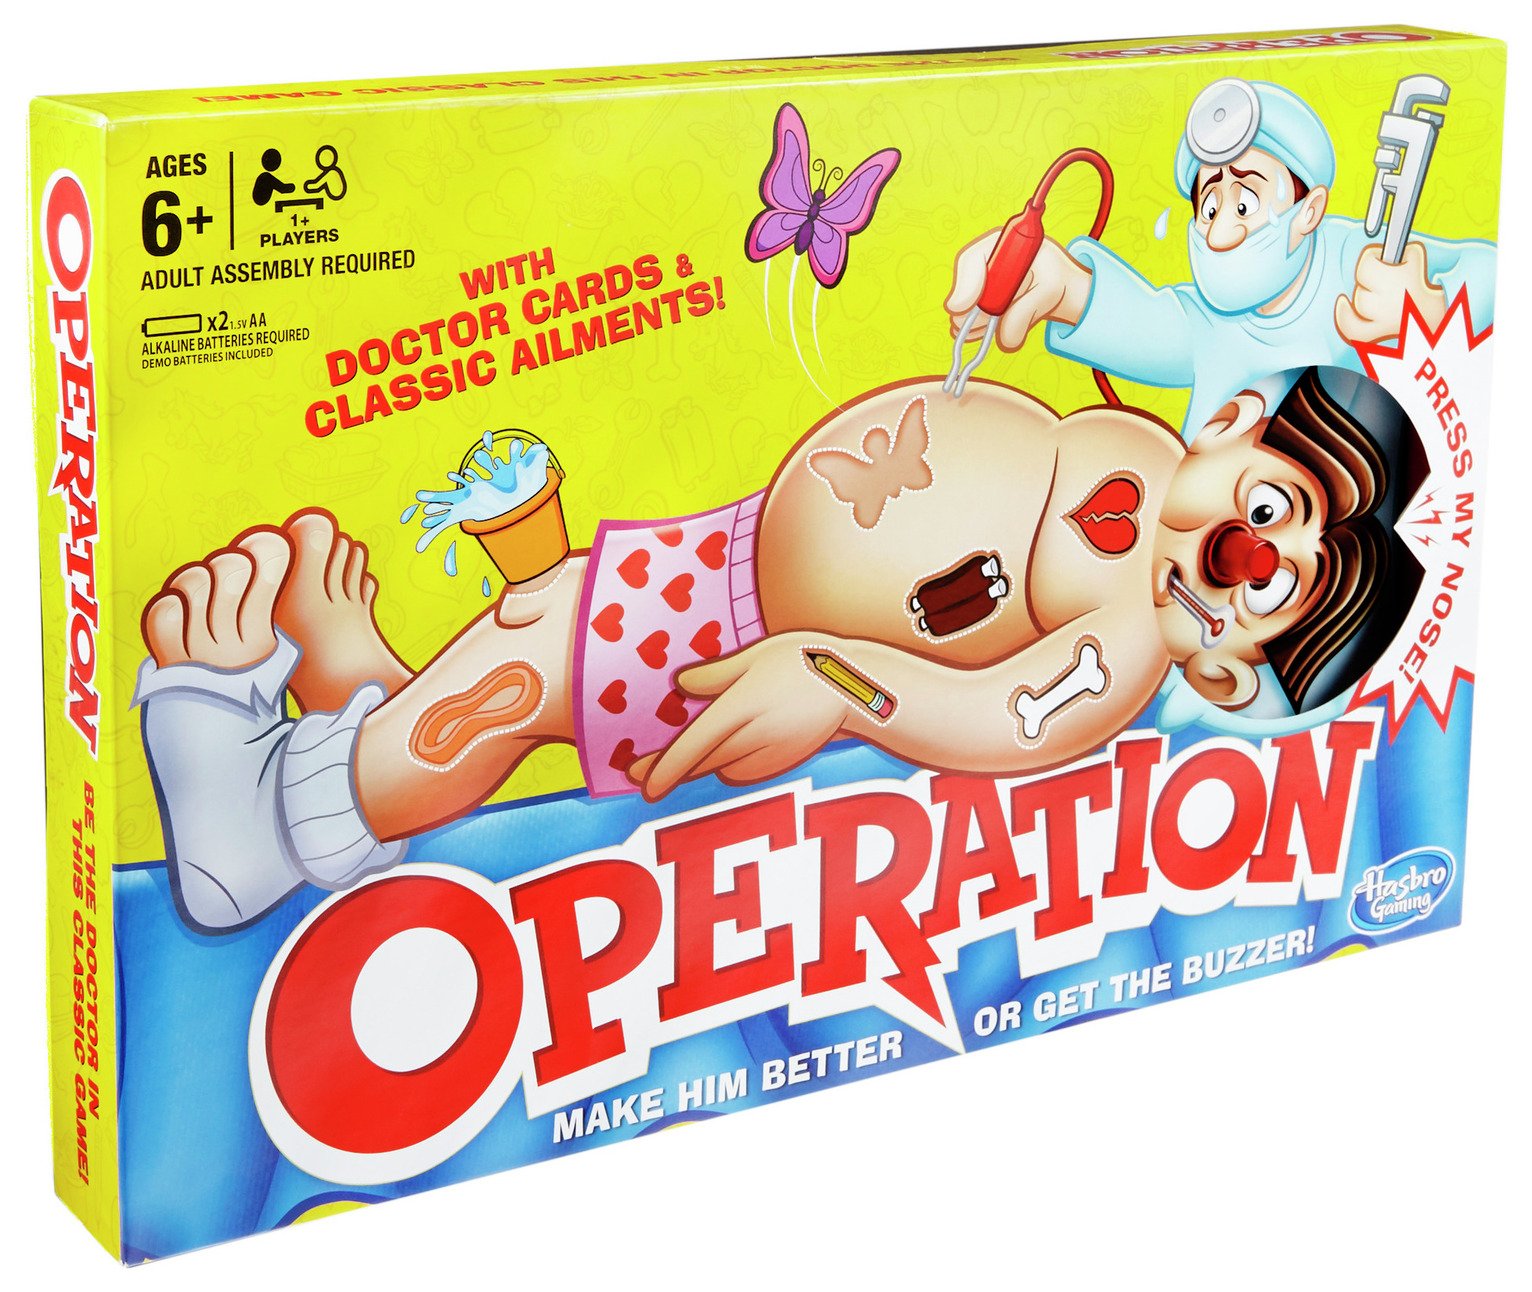 Classic Operation Game from Hasbro Gaming